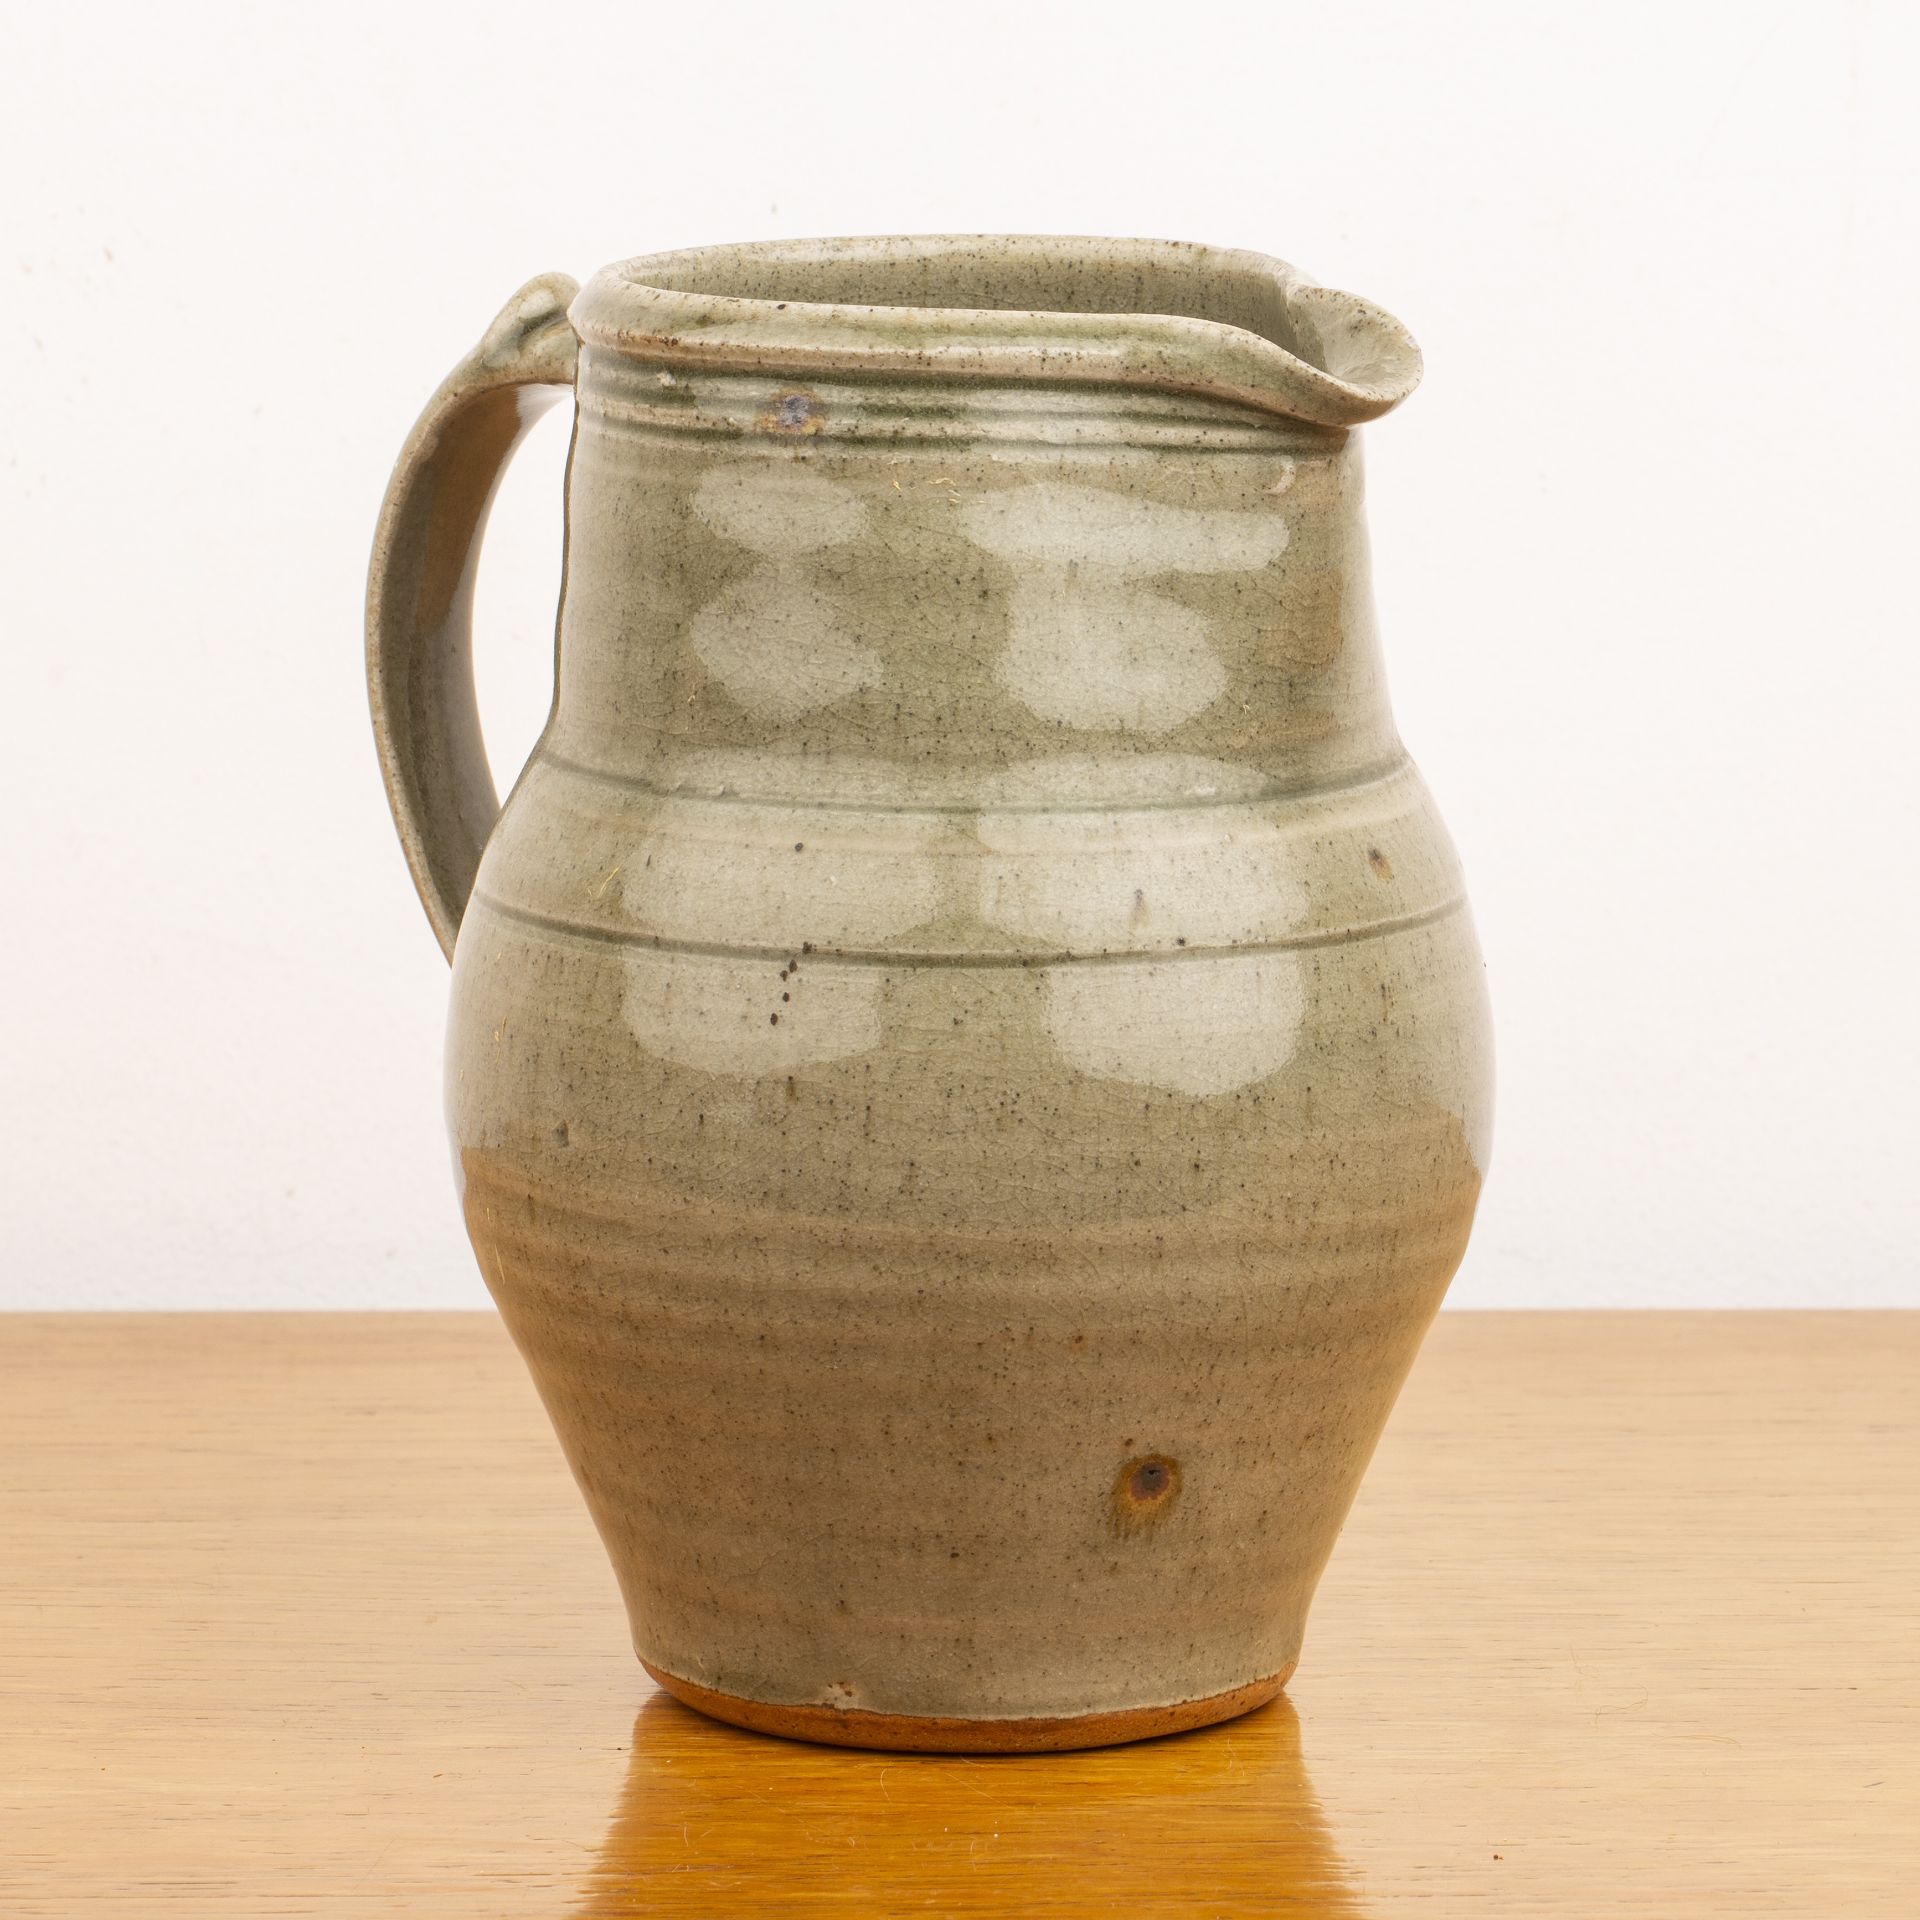 Leach pottery (St. Ives) Standard ware studio pottery jug with scrolling handle and incised banding, - Image 3 of 4